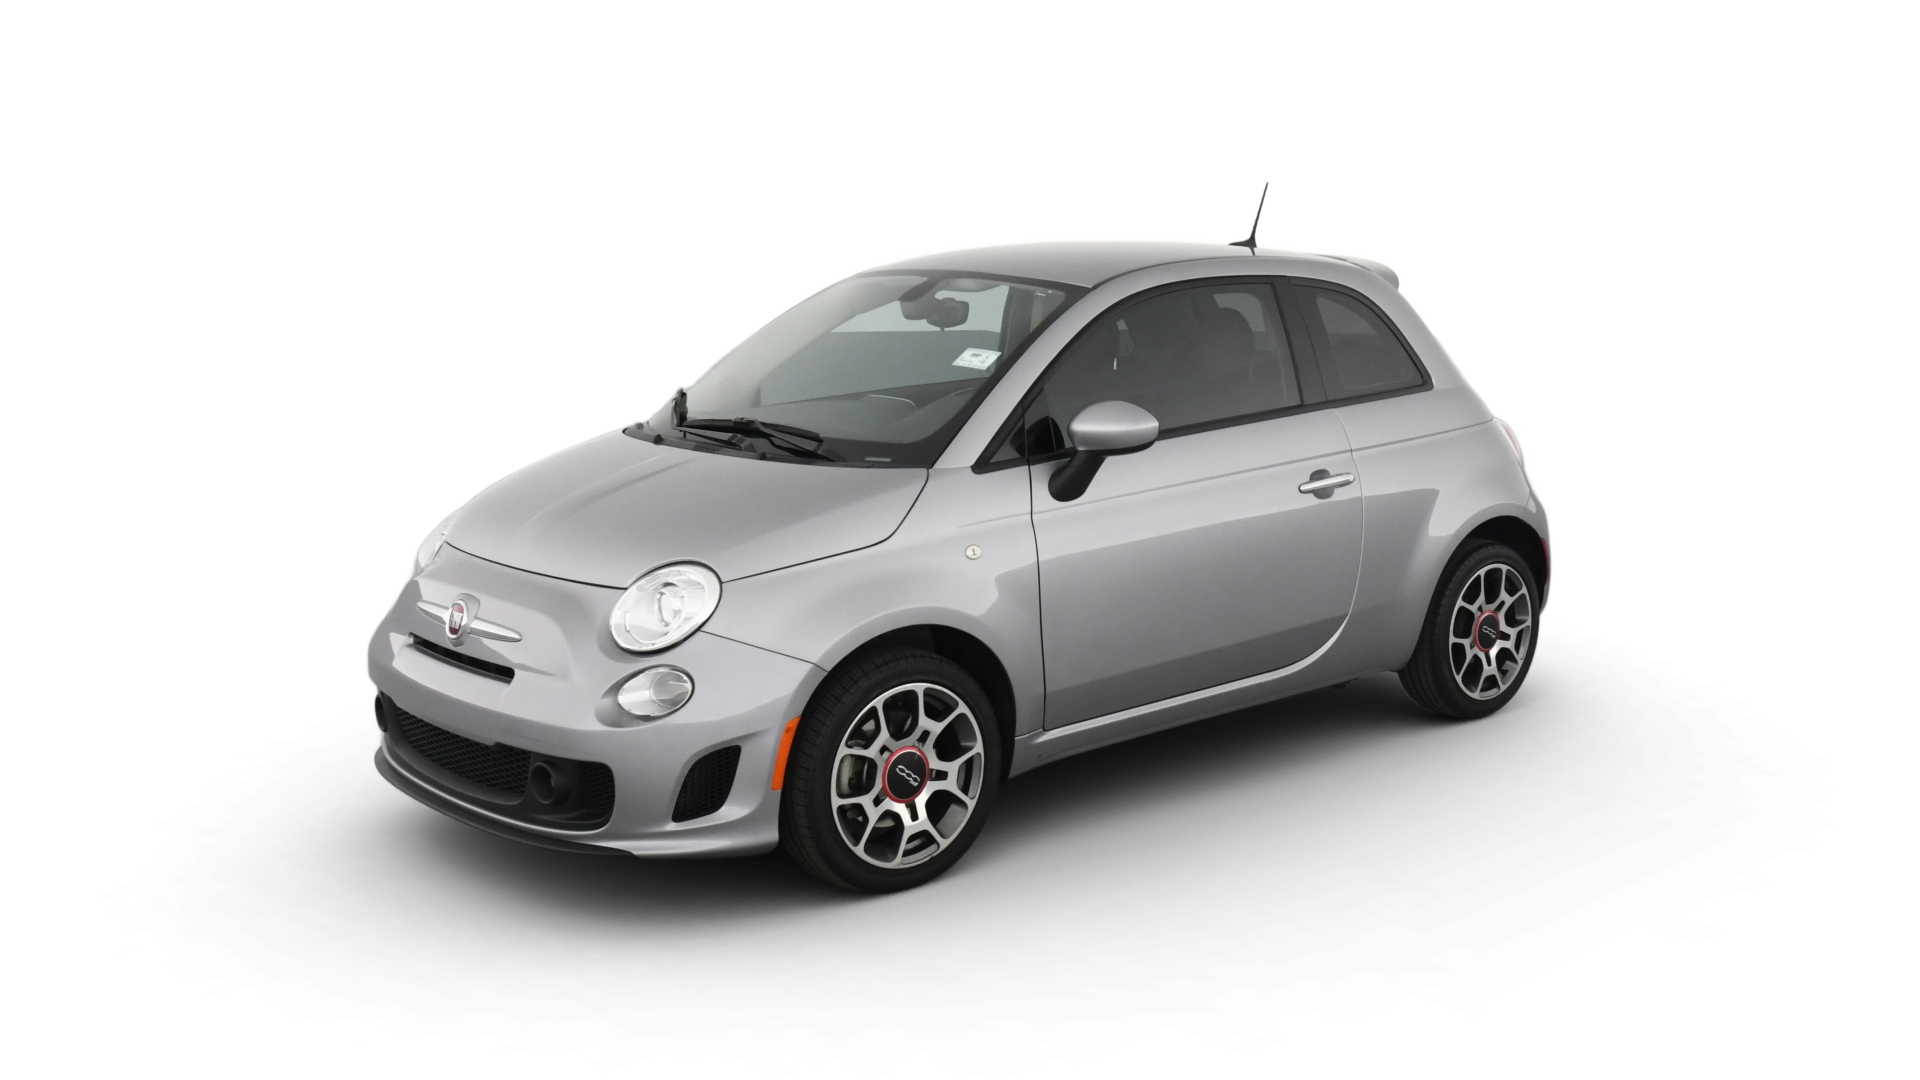 Caius Bacteriën Drama Used FIAT 500 Pop For Sale Online | Carvana